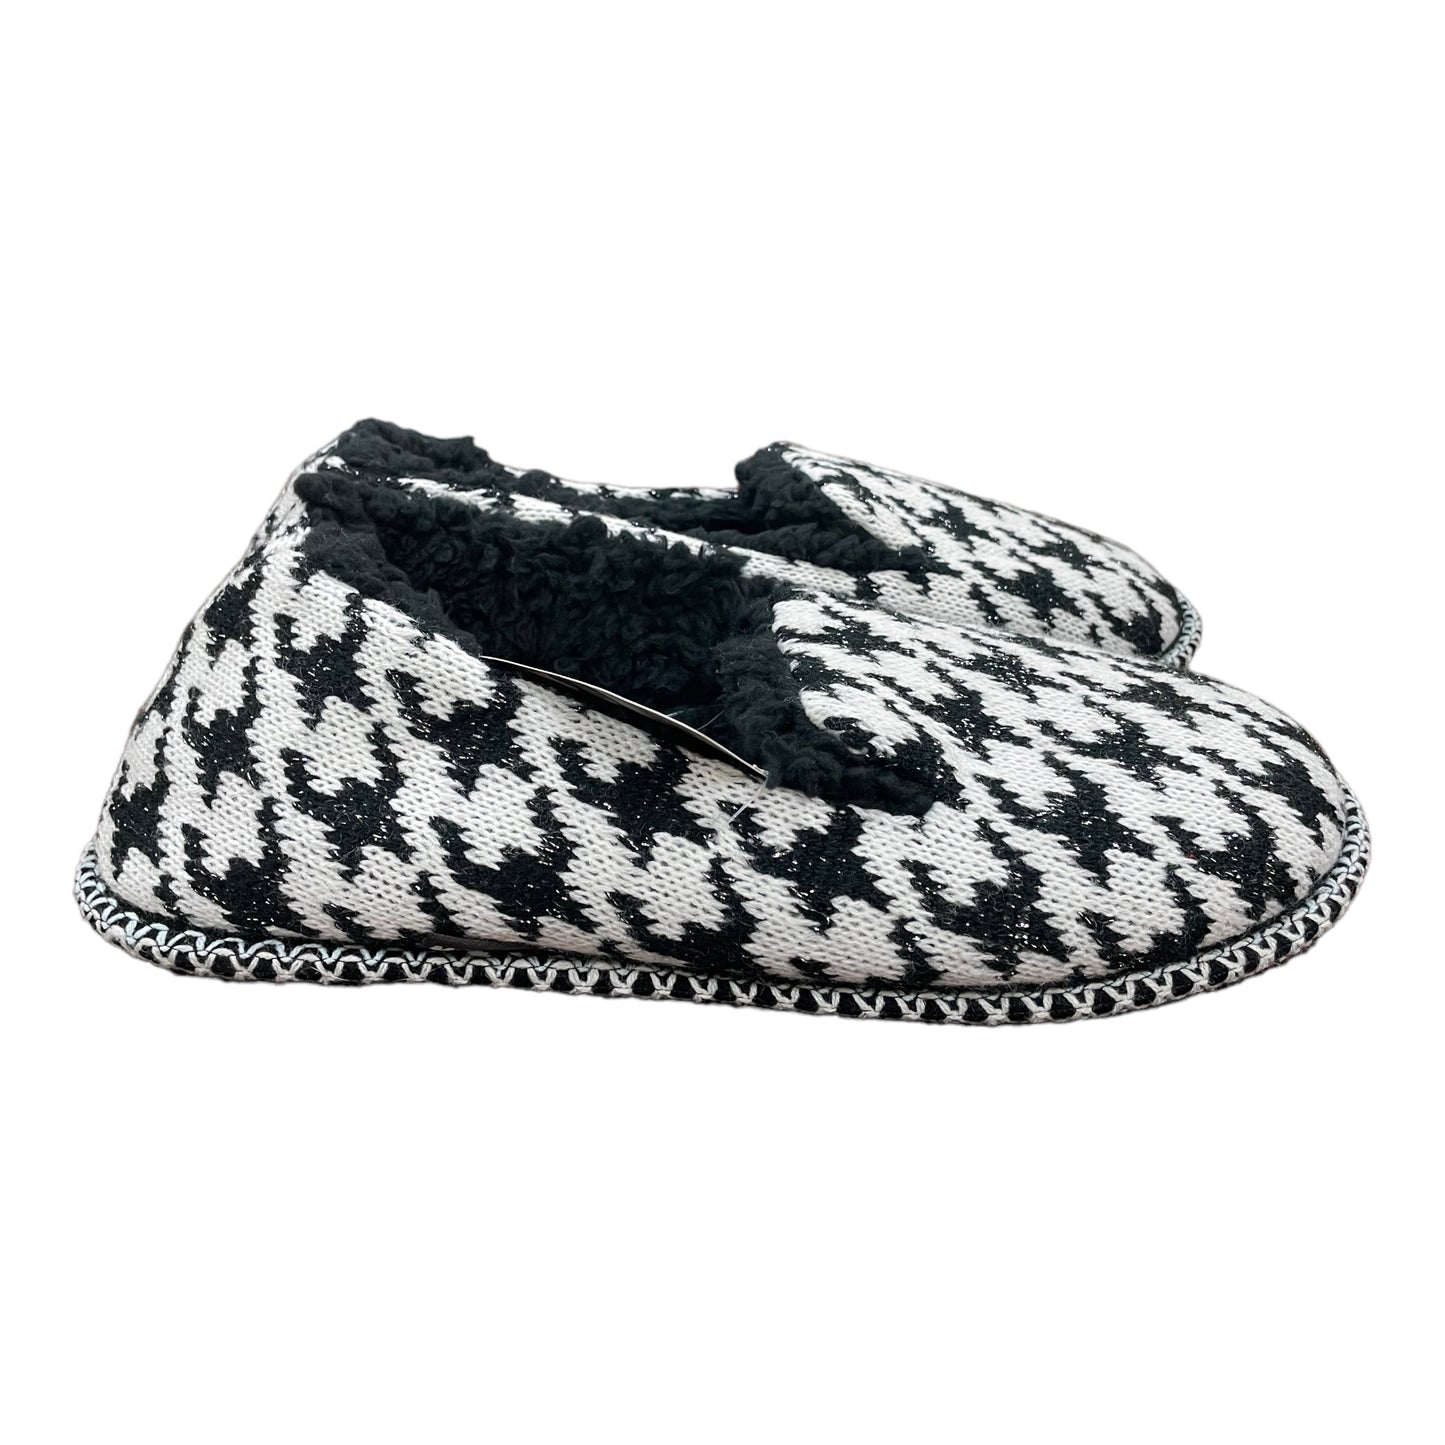 Slippers By Muk Luks  Size: 9